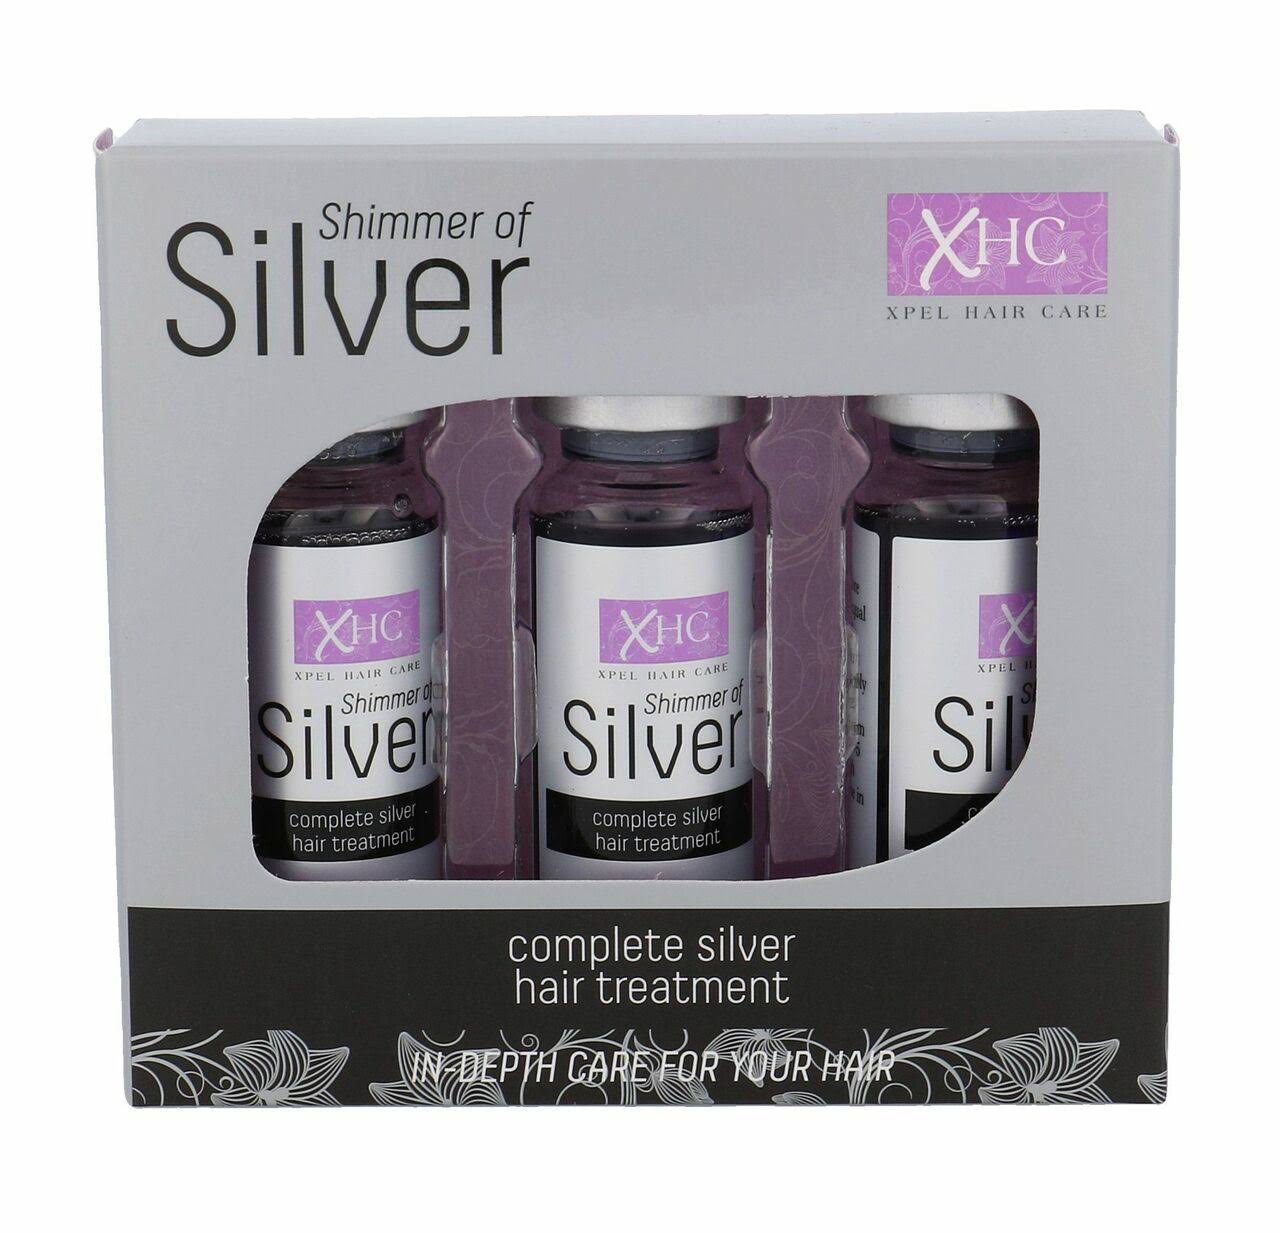 XHC Shimmer of Silver Complete Silver Hair Treatment Shots